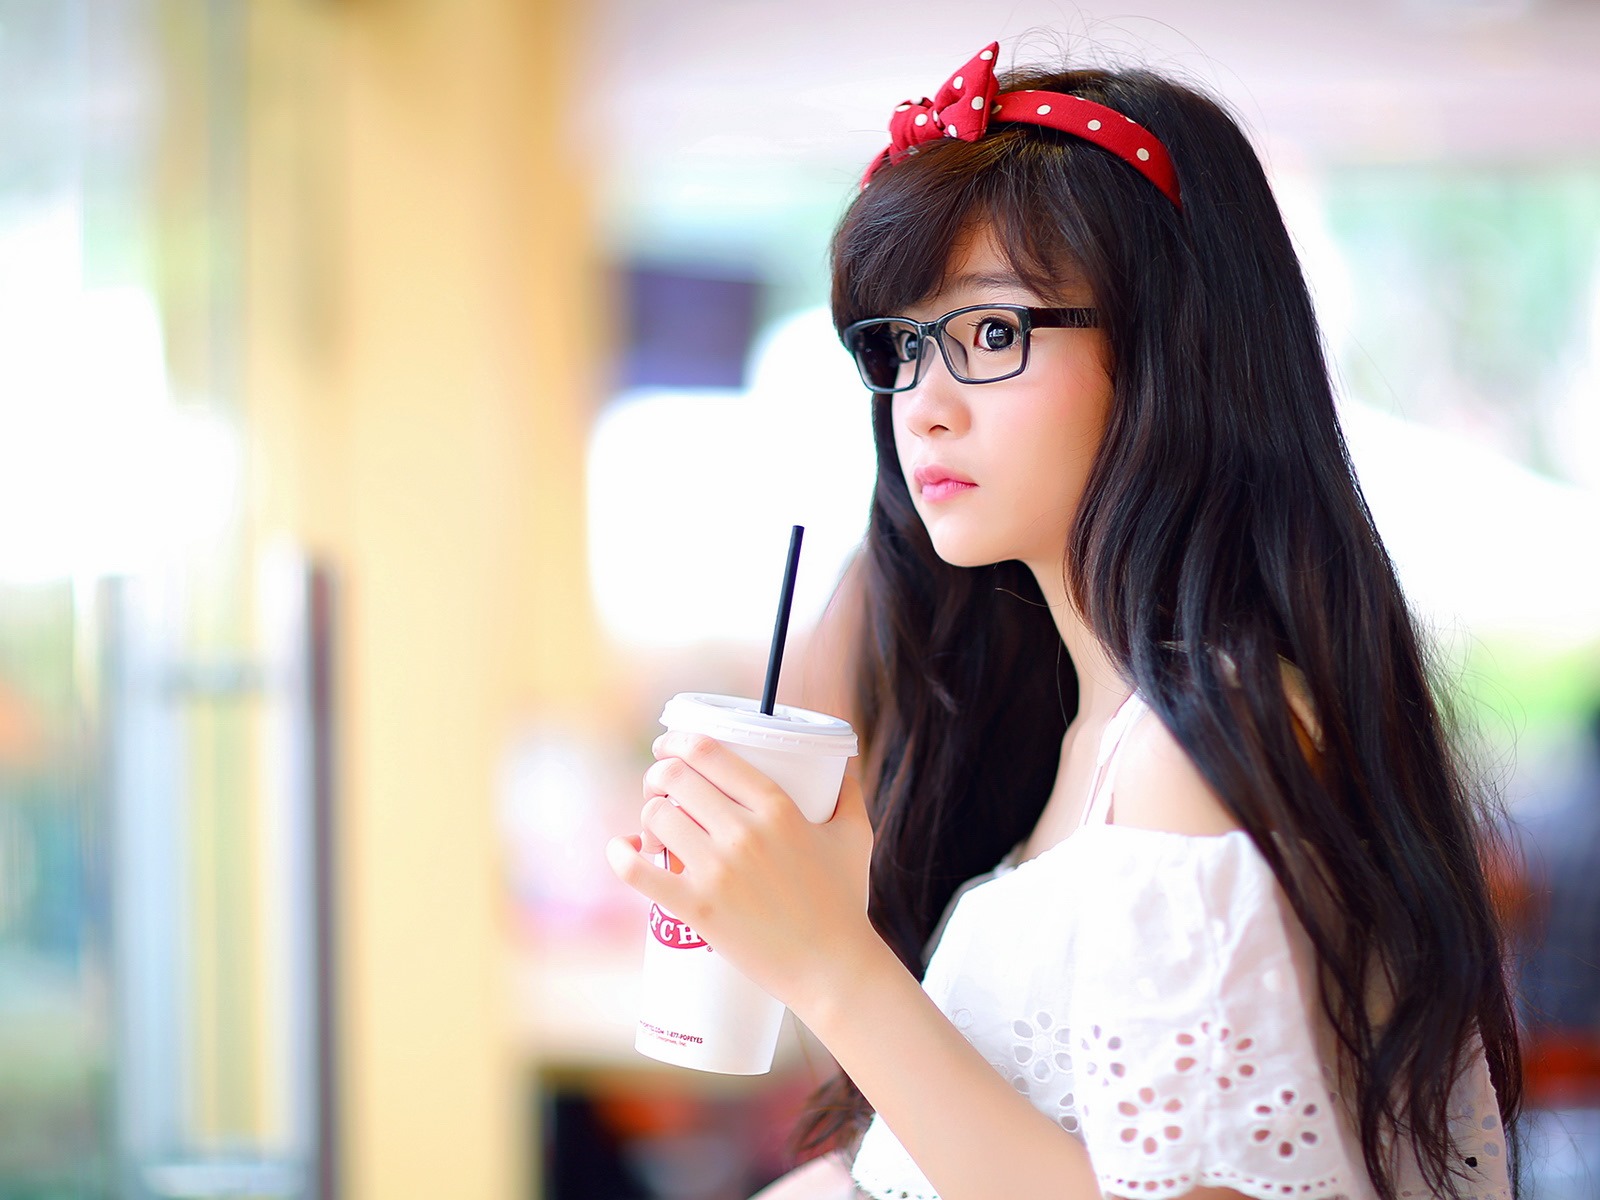 Pure and lovely young Asian girl HD wallpapers collection (3) #32 - 1600x1200